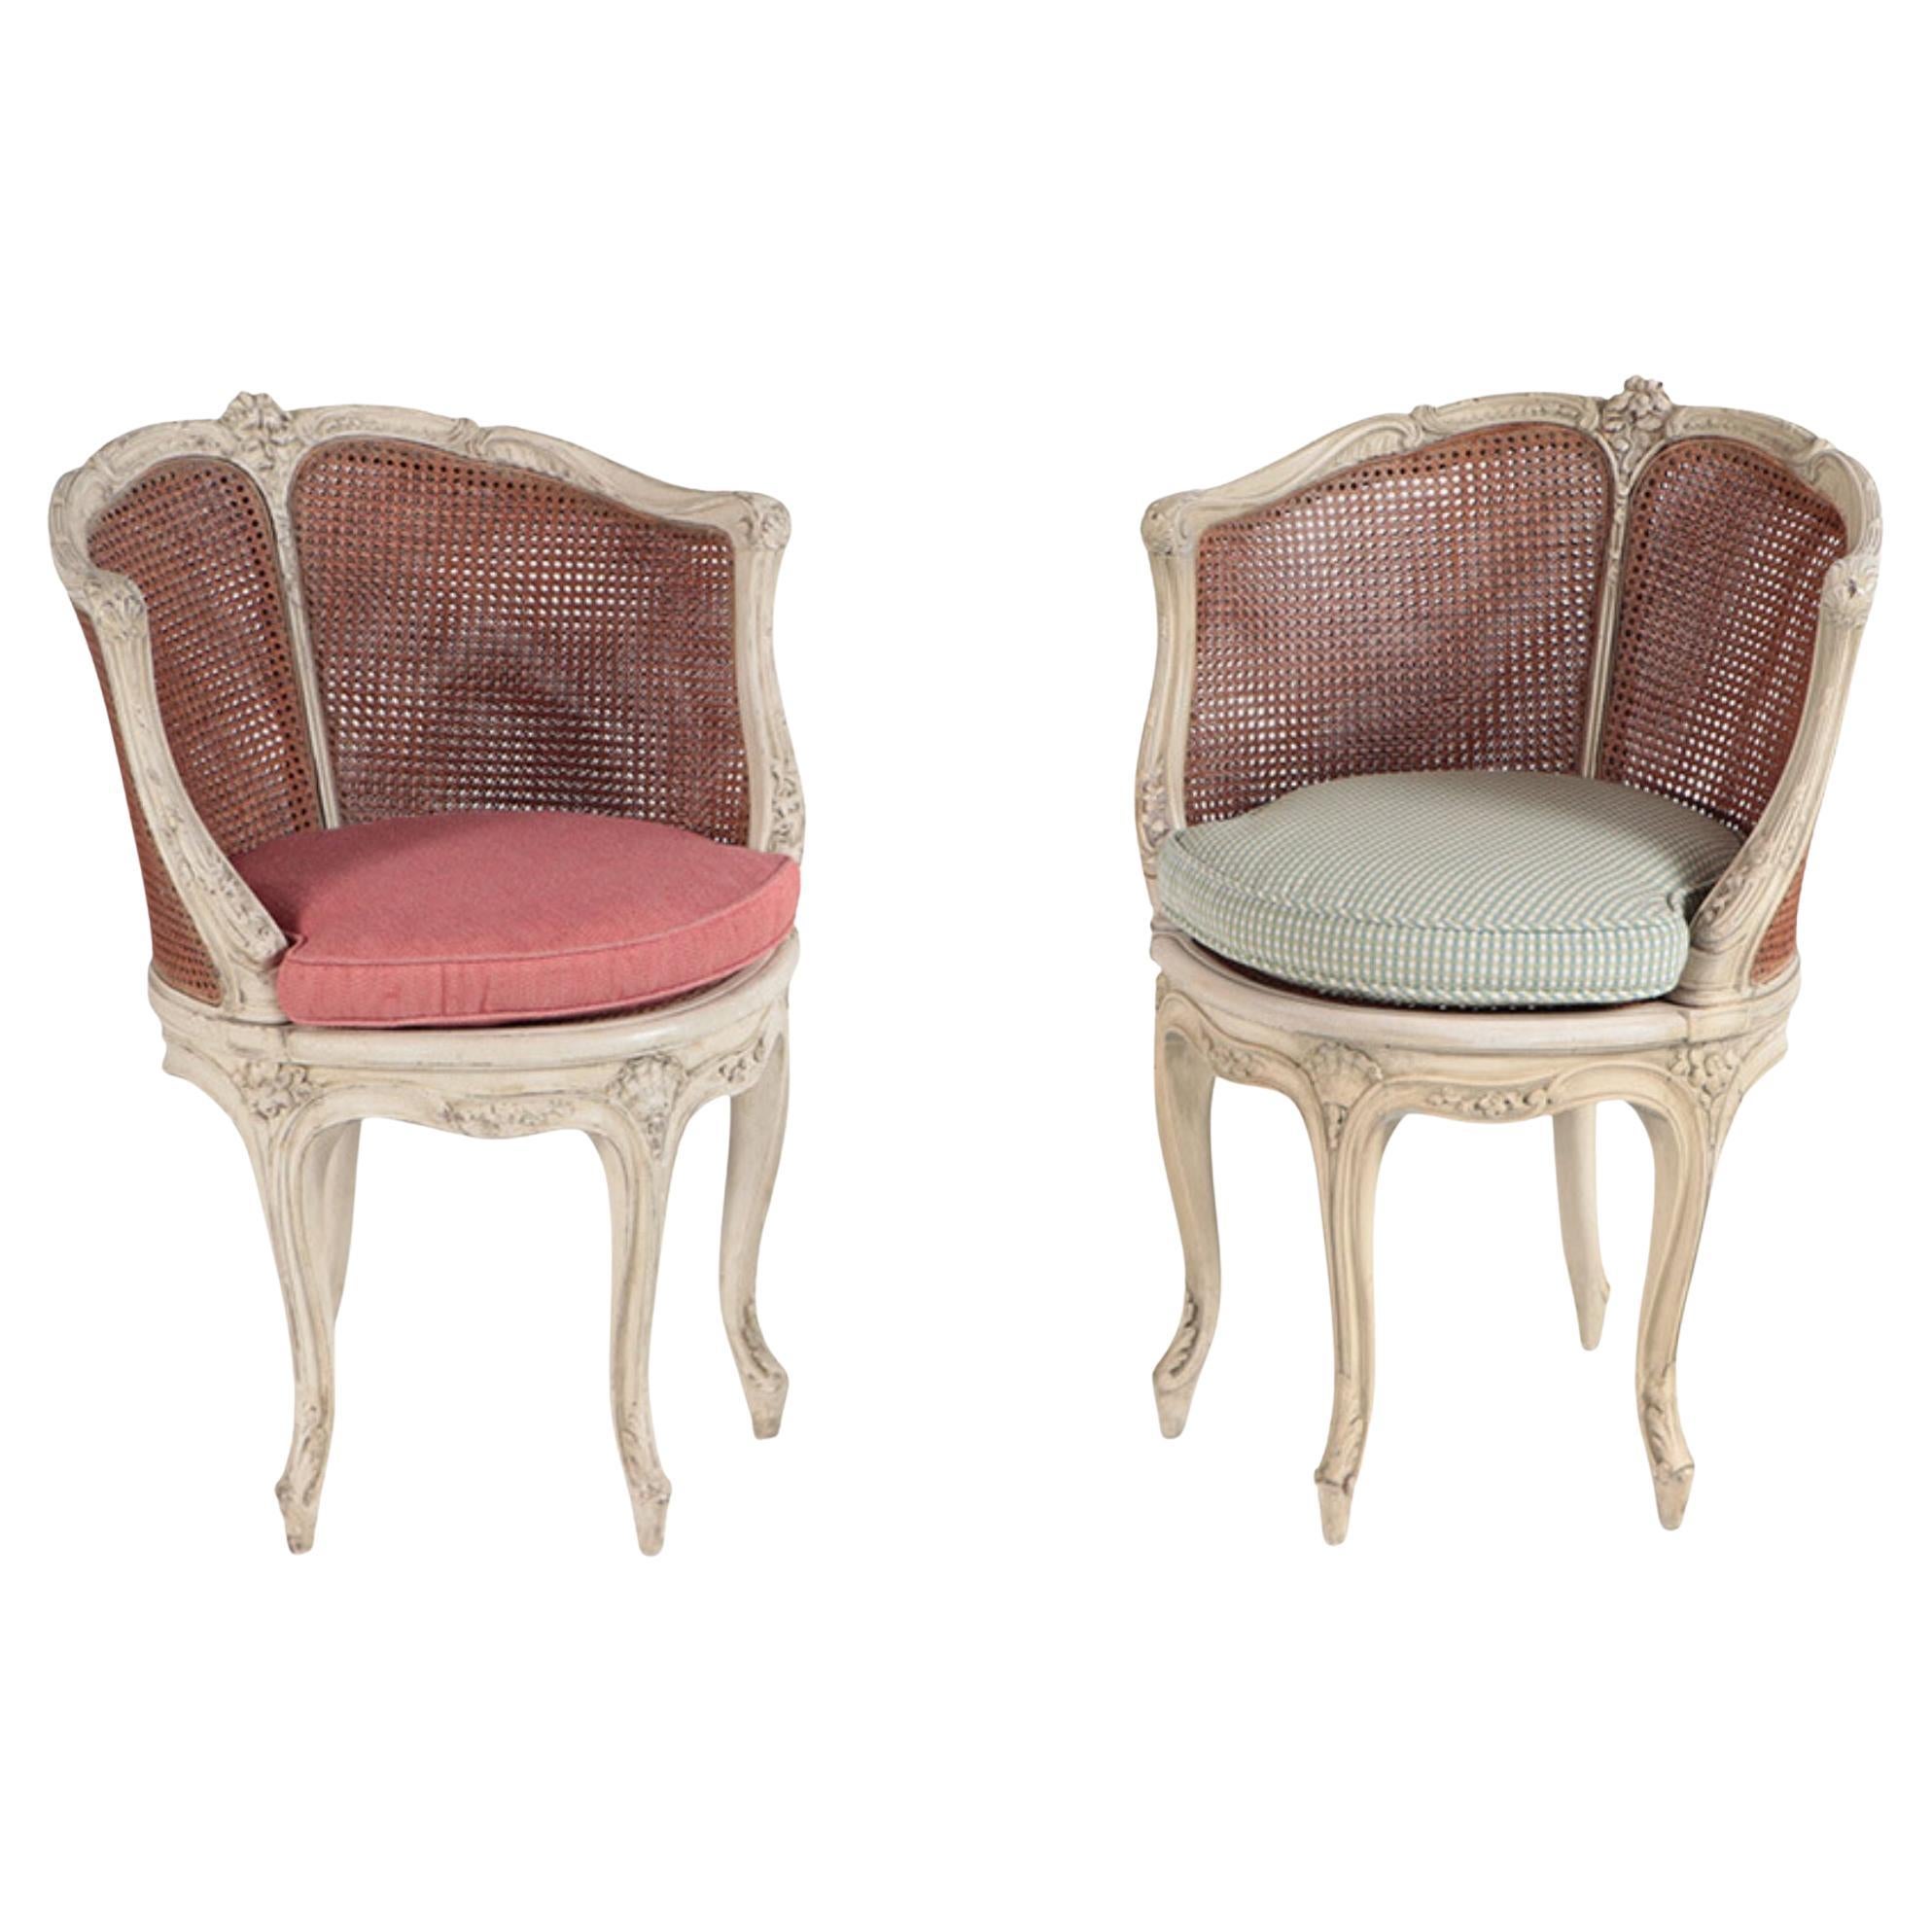 Pair of Painted, Cane and Carved French Louis XV Chairs, circa 1990